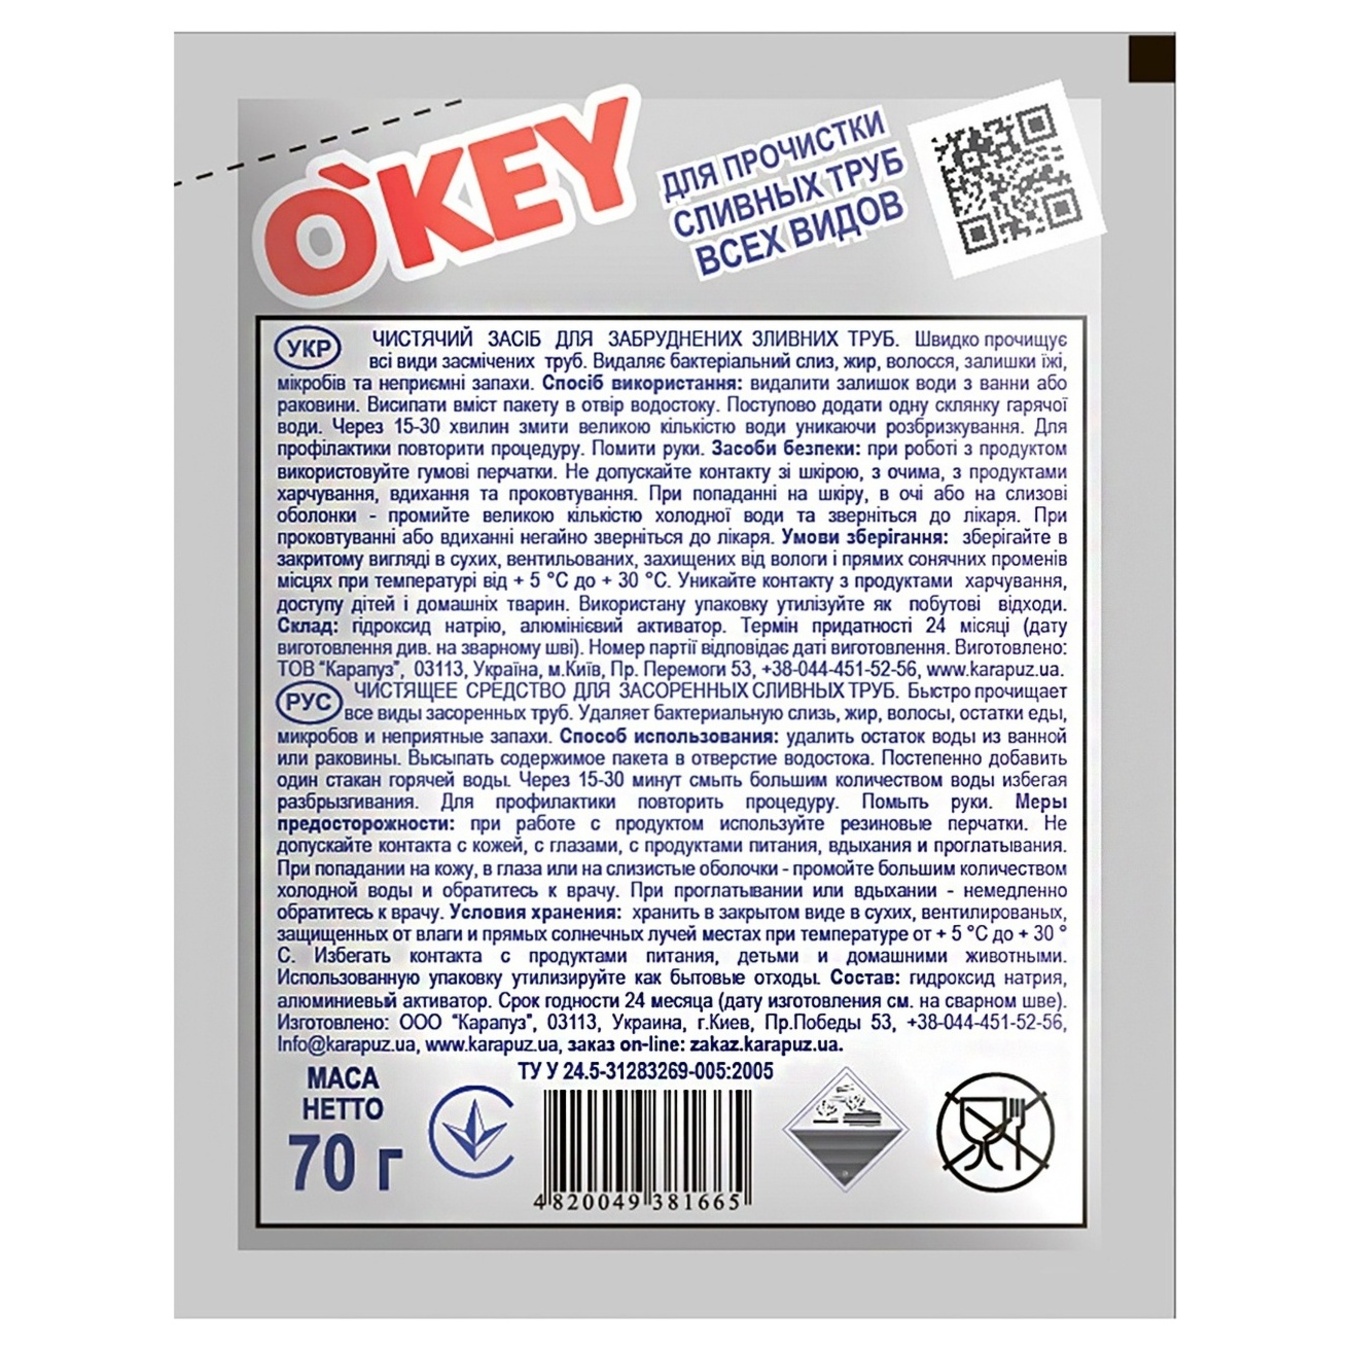 OKey means for cleaning pipes in hot water granulated 70g 2